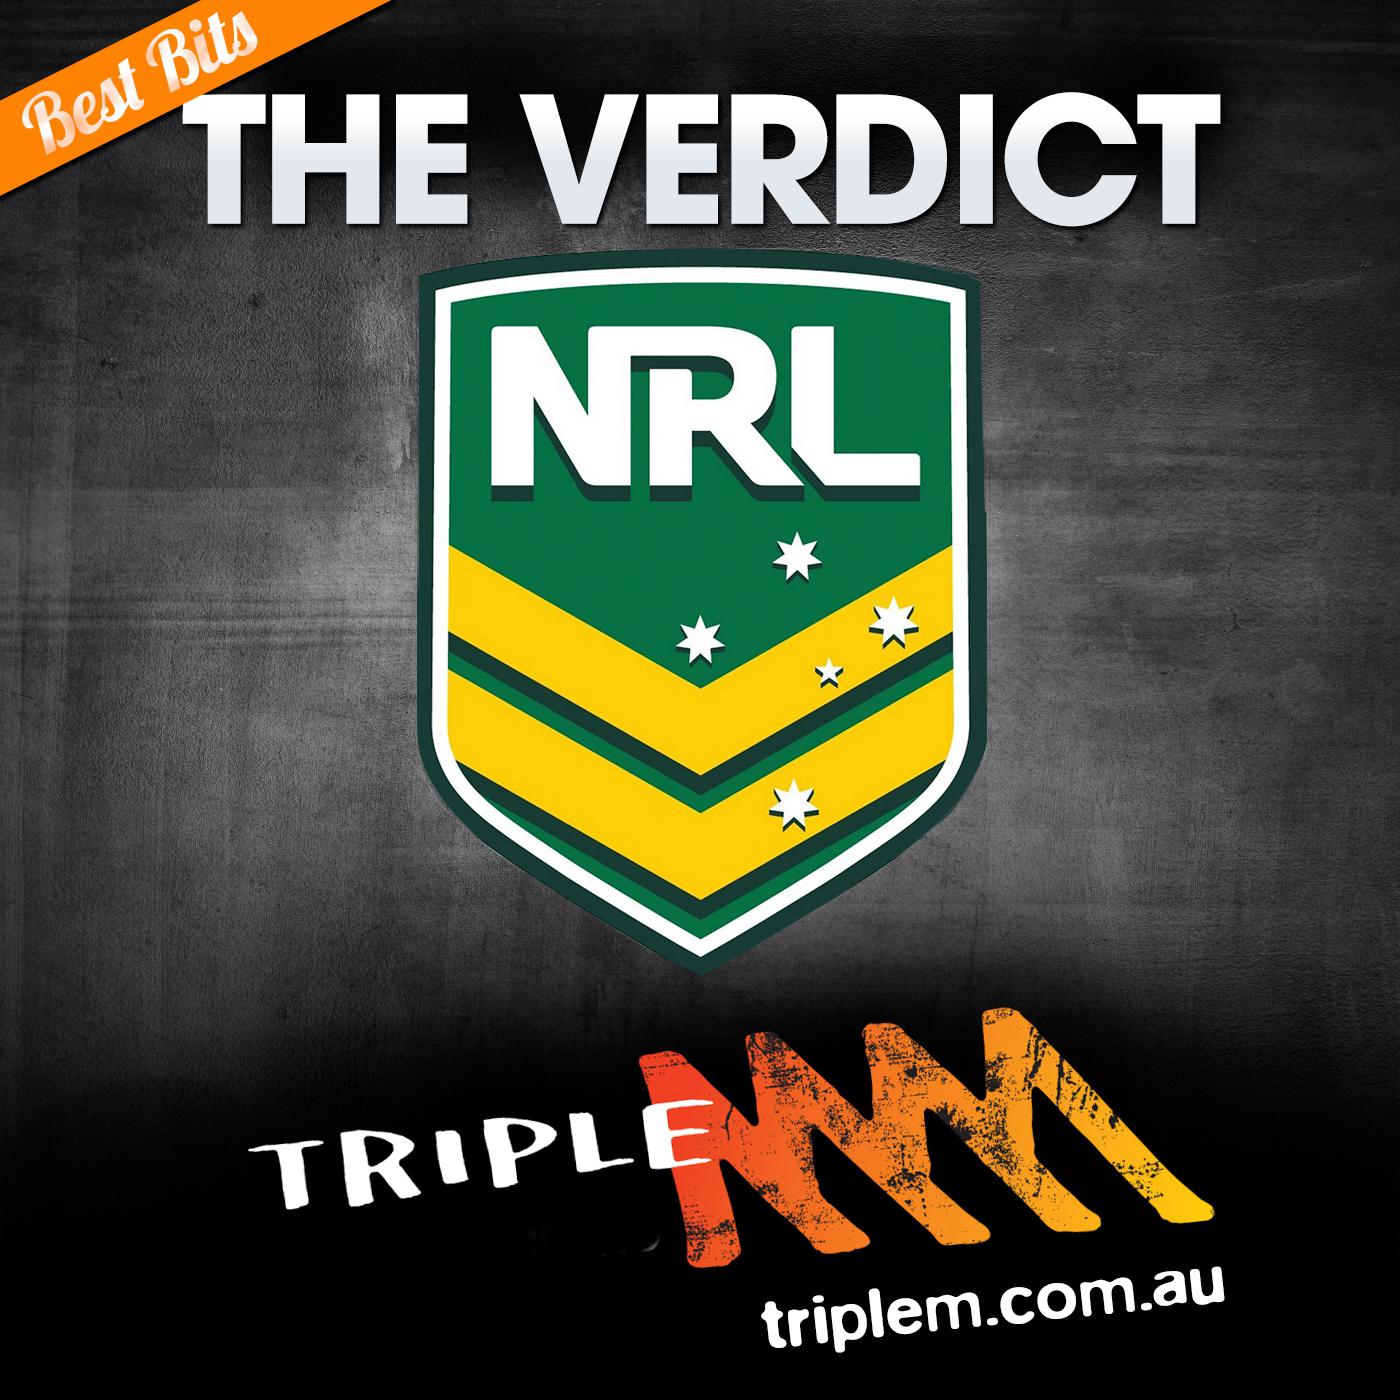 The Verdict  Dolphins win their very 1st NRL Game defeating the Roosters 28-18